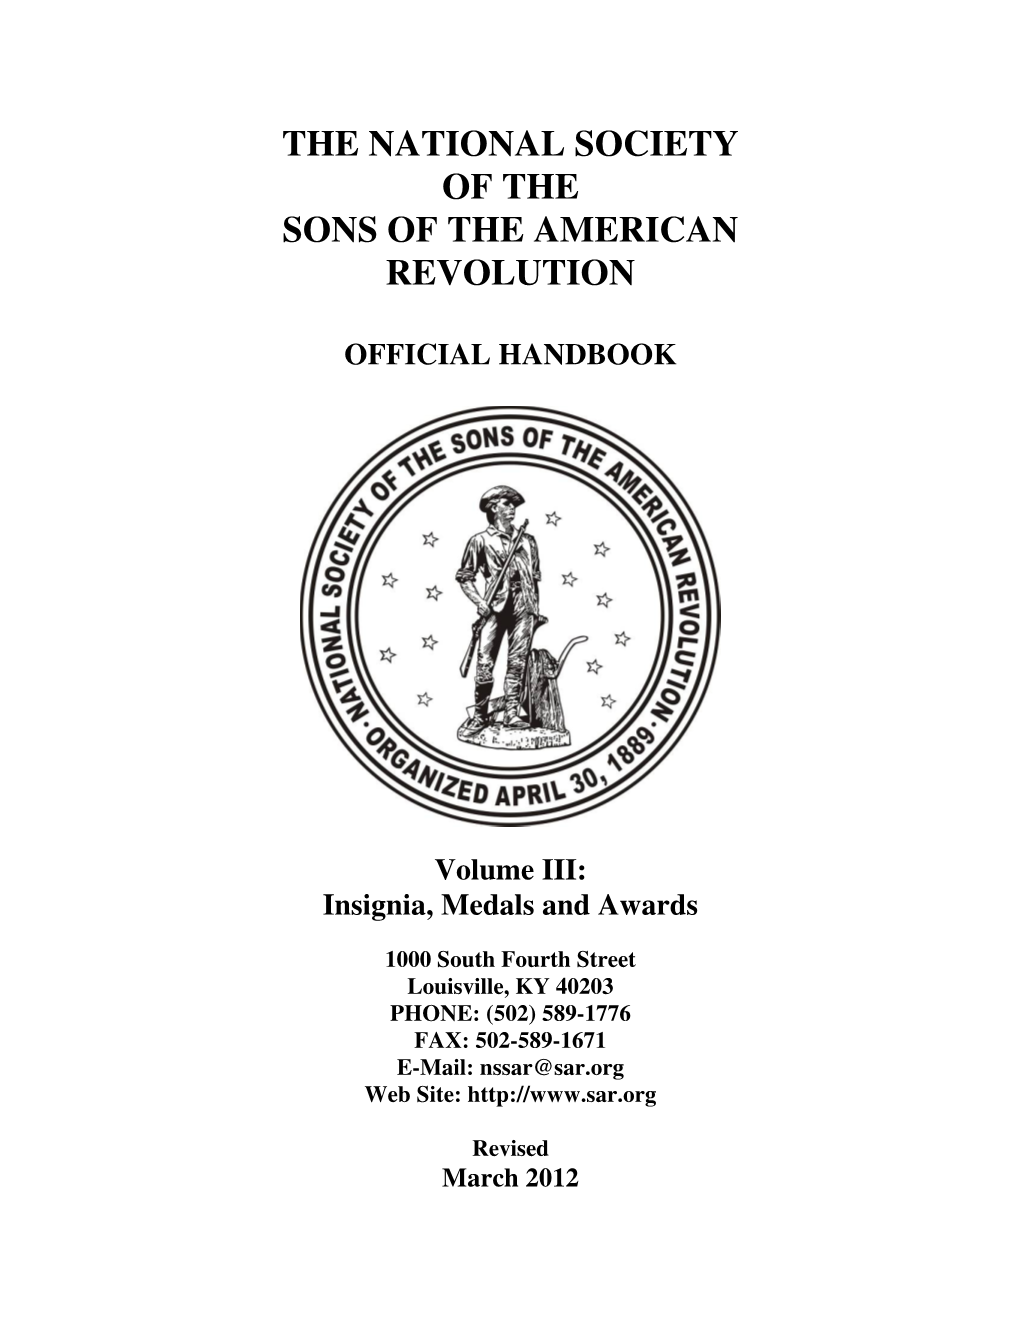 OFFICIAL HANDBOOK Volume III: Insignia, Medals and Awards